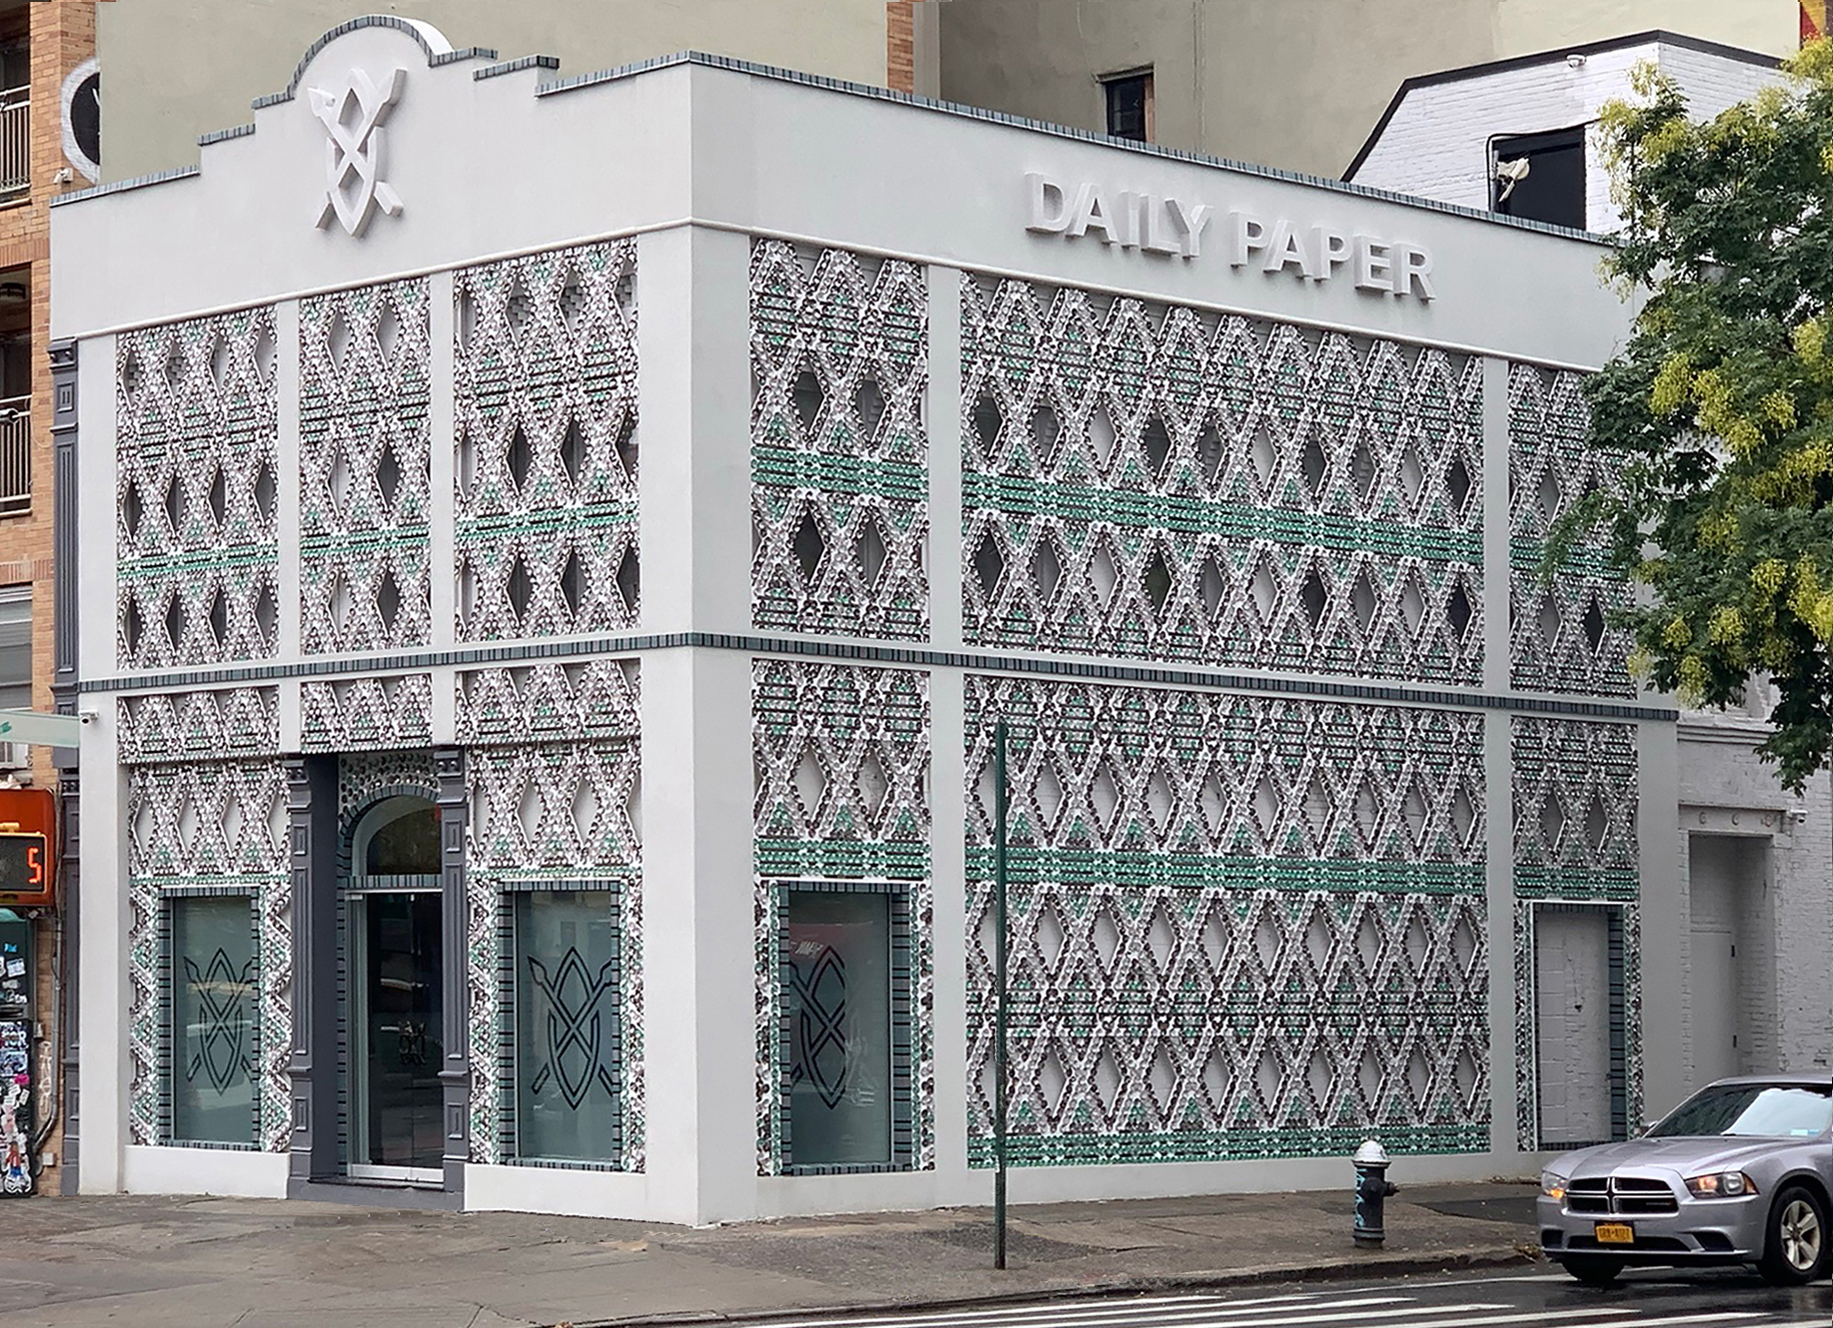 Design by architect Heather Faulding of flagship store for Daily Paper Clothing Store in the U.S. Three Founders of African heritage designed a brand to reflect "Pan-African pride and community." The store design blends their Dutch base with the very inventive ways of African design with recycling and found materials. The beadwork design on the facade was made with soda cans cut and folded by communities that the architect and contractor sponsored to help. Interior had a hidden stair so a glass floor and skylight above second floor draw the eye and experience to the second floor. Photography of facade by Andrew Matusik.